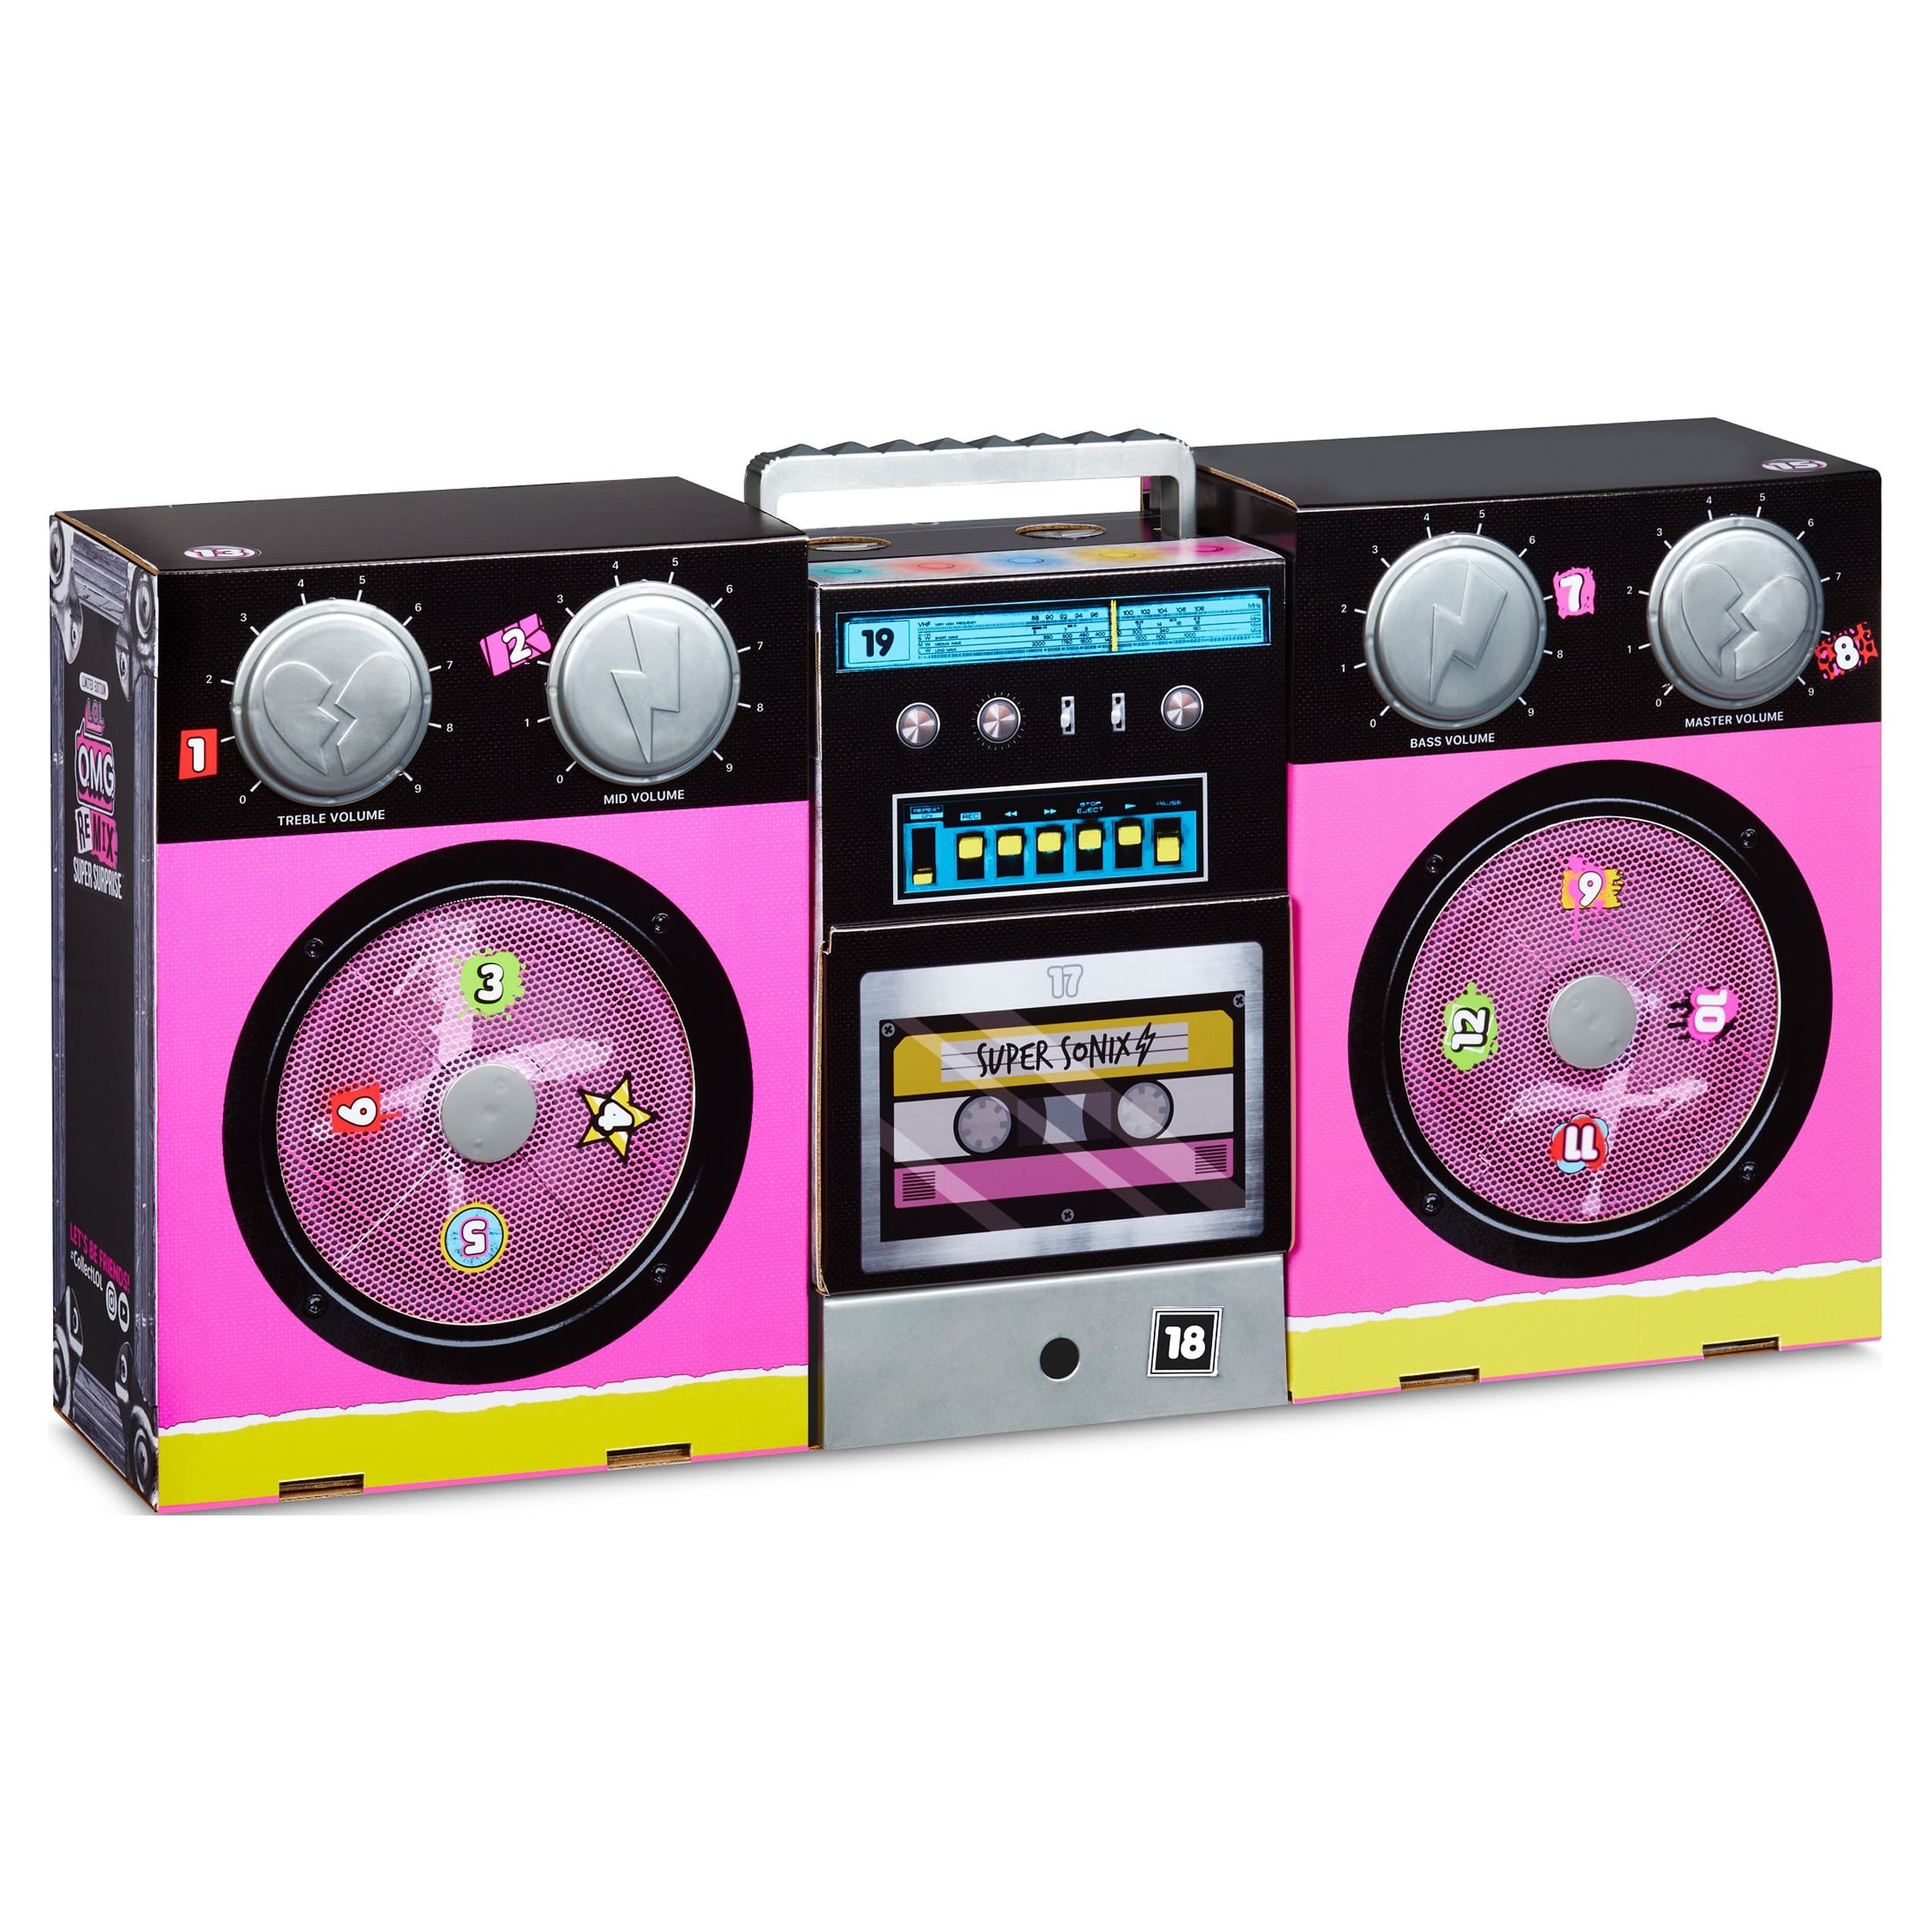 LOL Surprise OMG Remix Super Surprise With 70+ Surprises Including 4 Fashion Dolls And 4 Dolls (Sisters), Rock Instruments That Really Play Music, Boom Box Packaging, Rock Band Accessories Ages 4+ - image 3 of 4